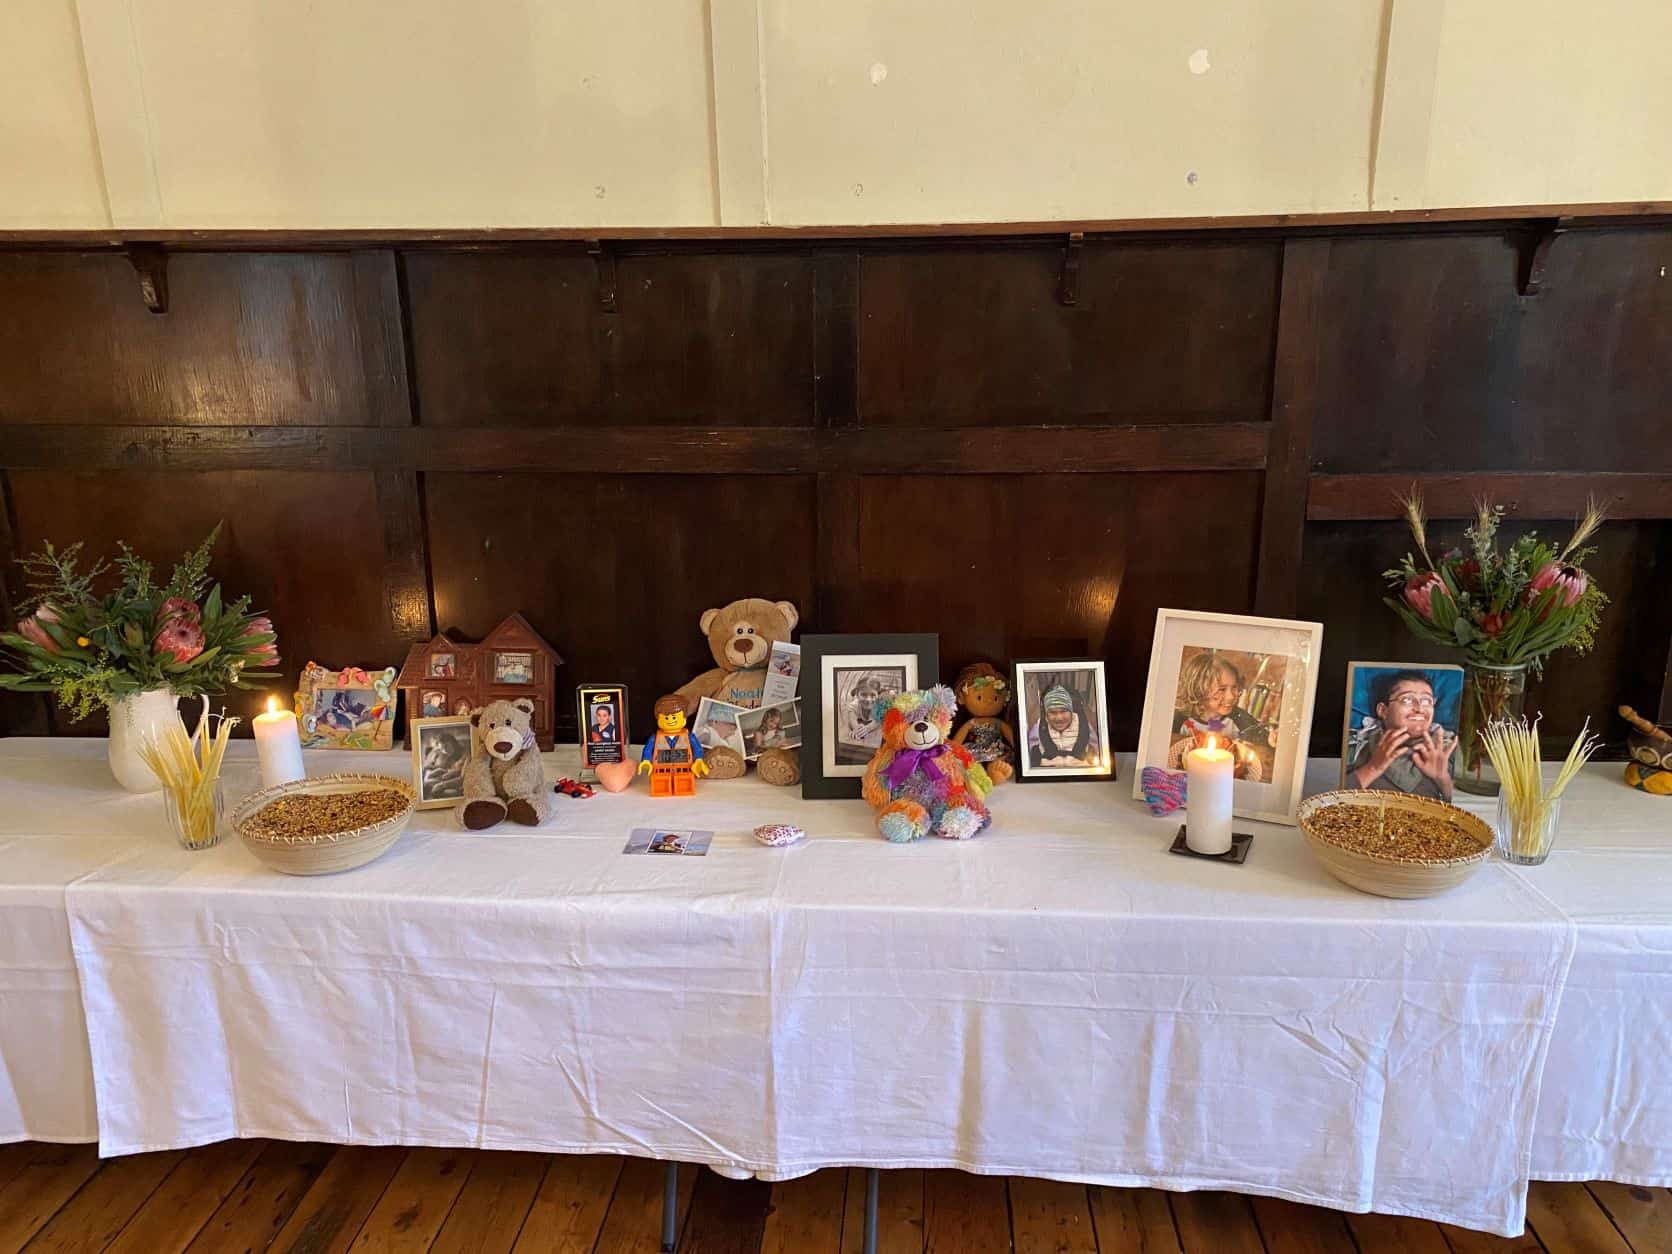 A long table is set with photos and mementos of children. There are candles lit in their memory.